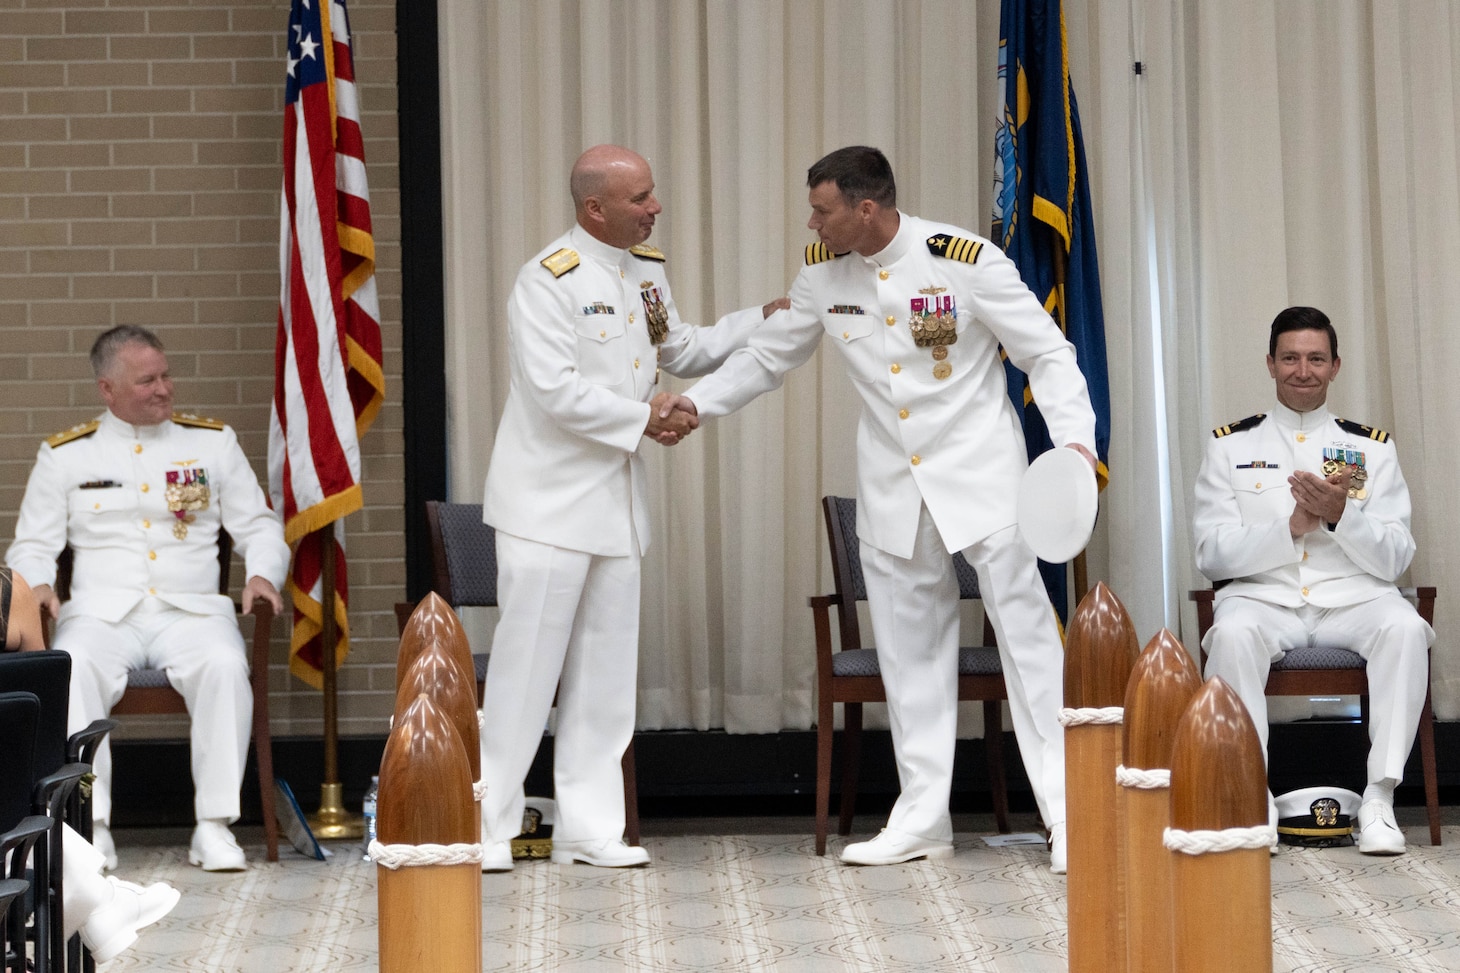 Vice Adm. James W. Kilby, deputy commander, United States Fleet Forces Command, left, congratulates Capt. Todd Whalen, oncoming president, Board of Inspection and Survey (INSURV), after reading his orders during the INSURV change of command ceremony. INSURV is responsible for inspecting the fleet’s in-service and new construction ships, determining their material readiness, and reporting this assessment to Congress, and Navy Leadership.